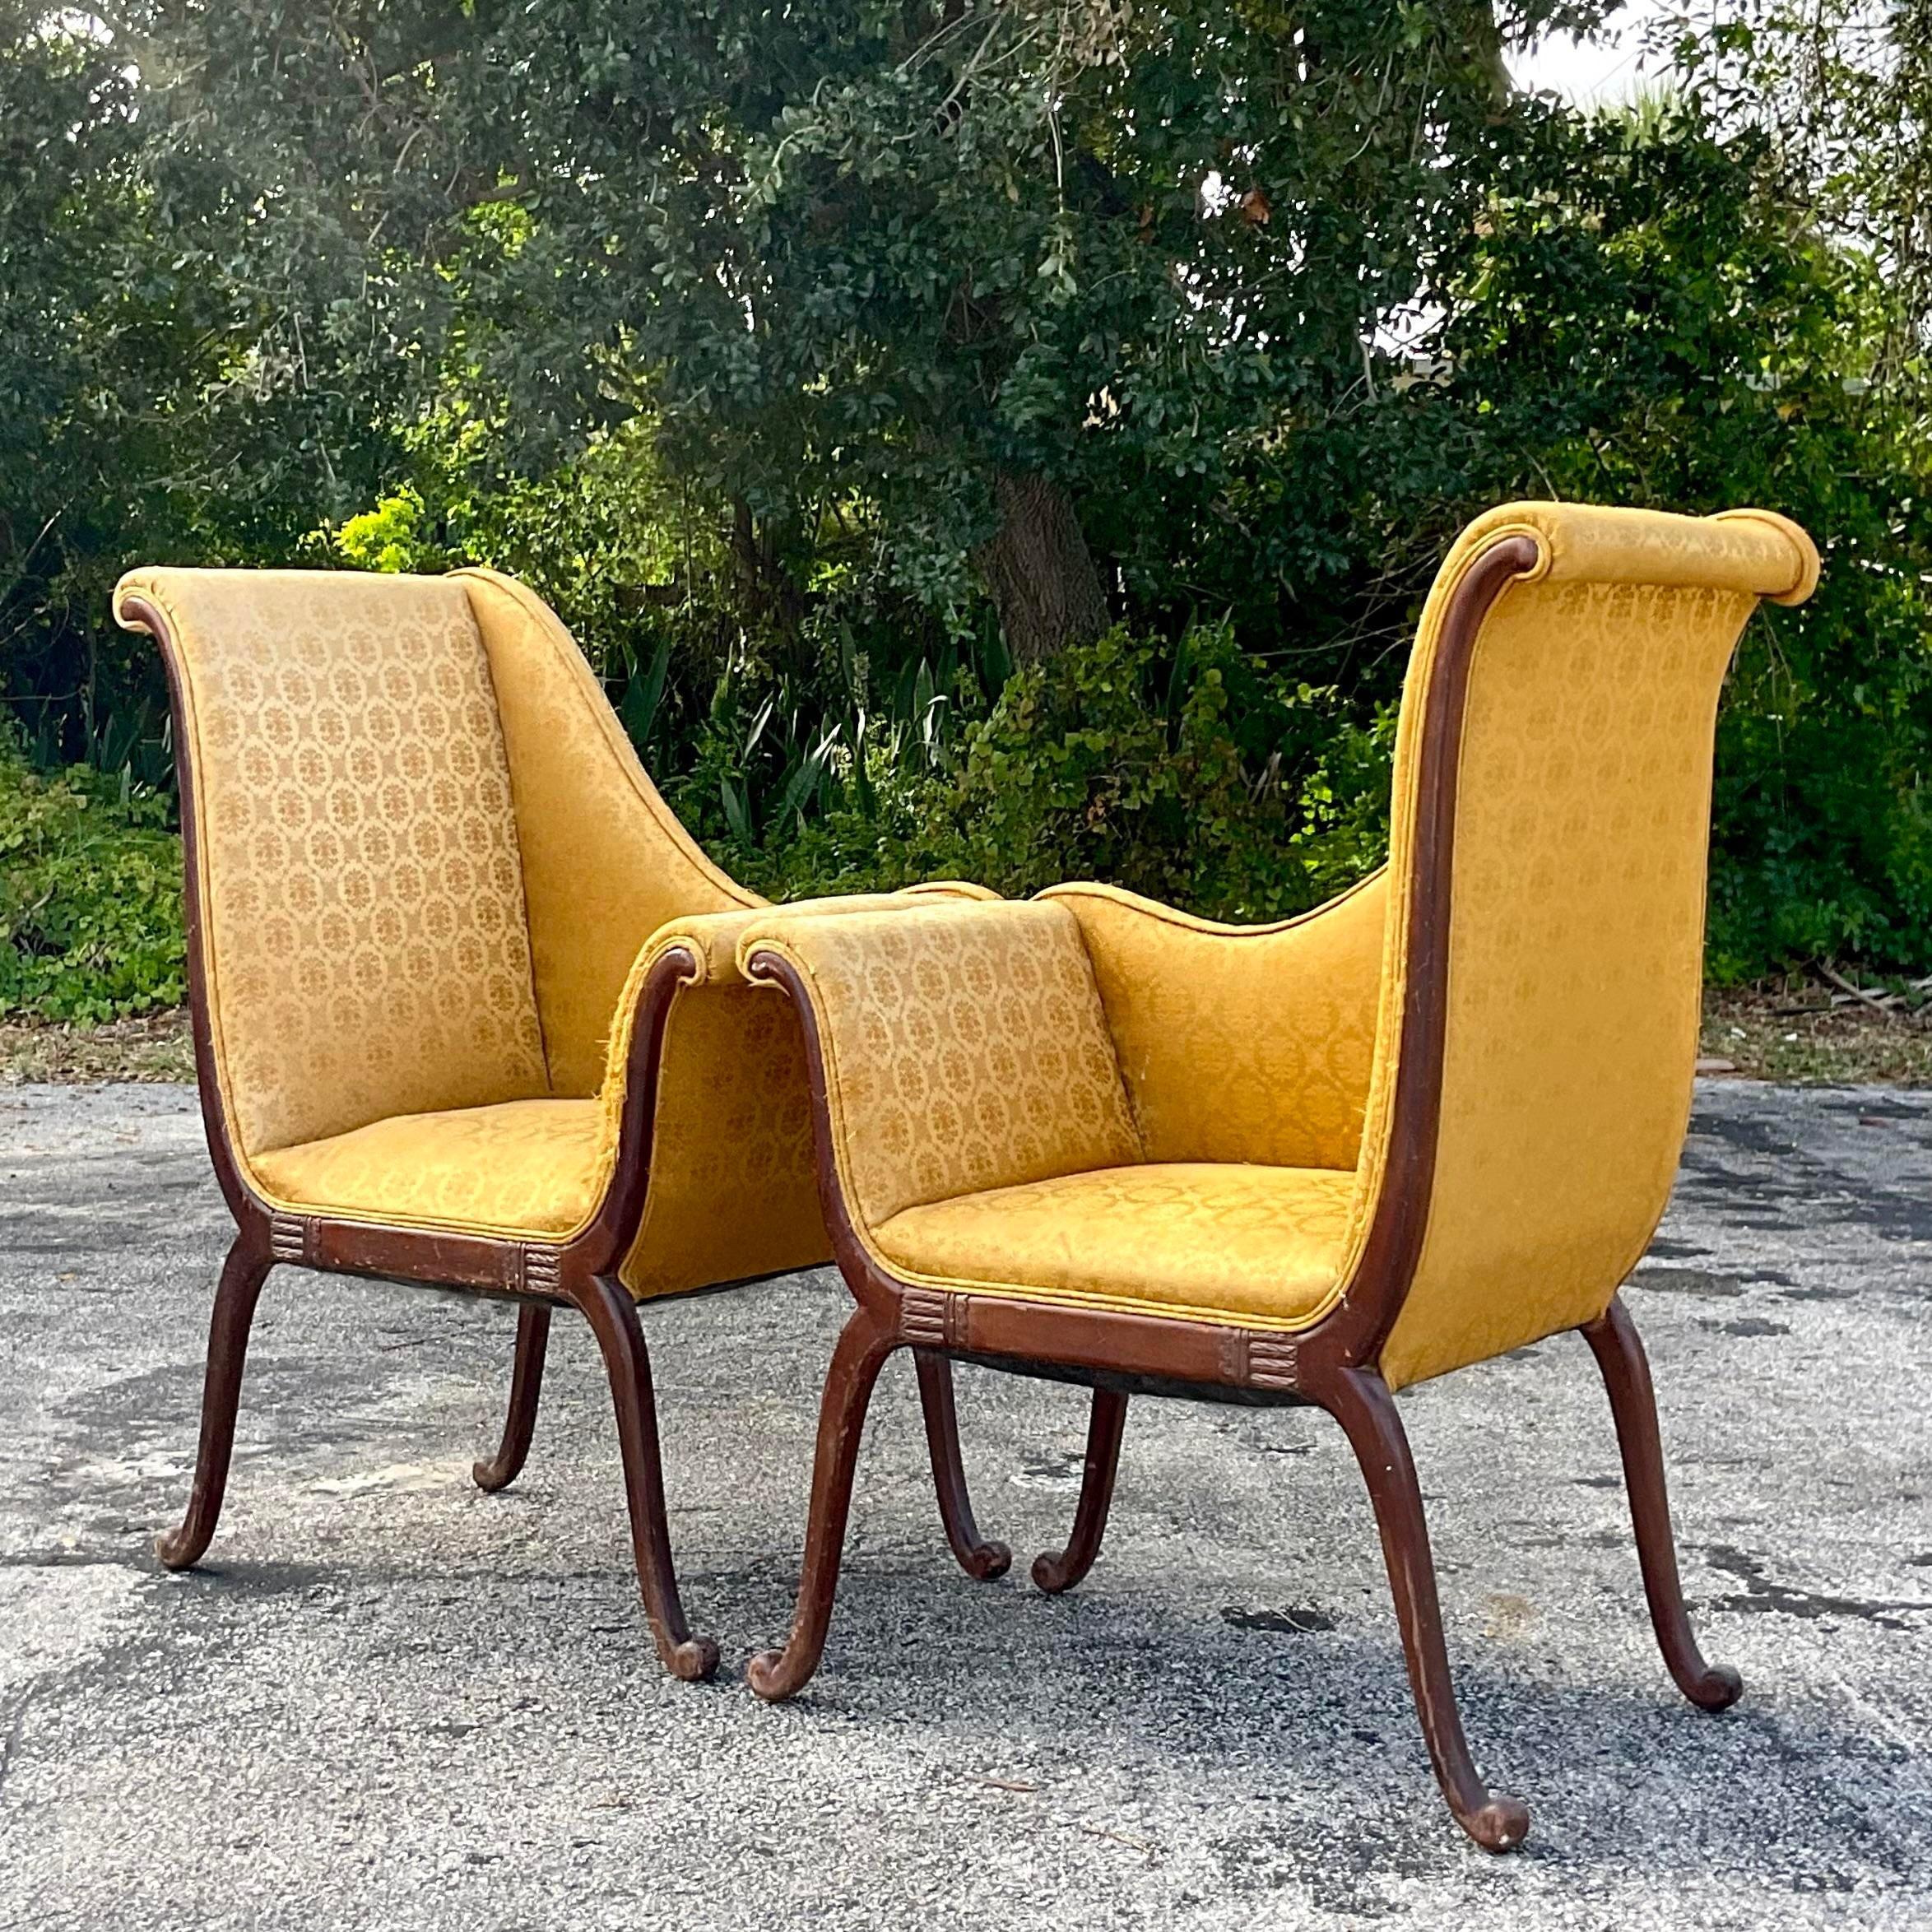 A fantastic vintage Regency lounge chairs. A chic Parker Deux design with beautiful hand carved detail. These chairs are structurally great, but require reupholstery. But once reimagined they will be showstoppers. Acquired from a Palm Beach estate.